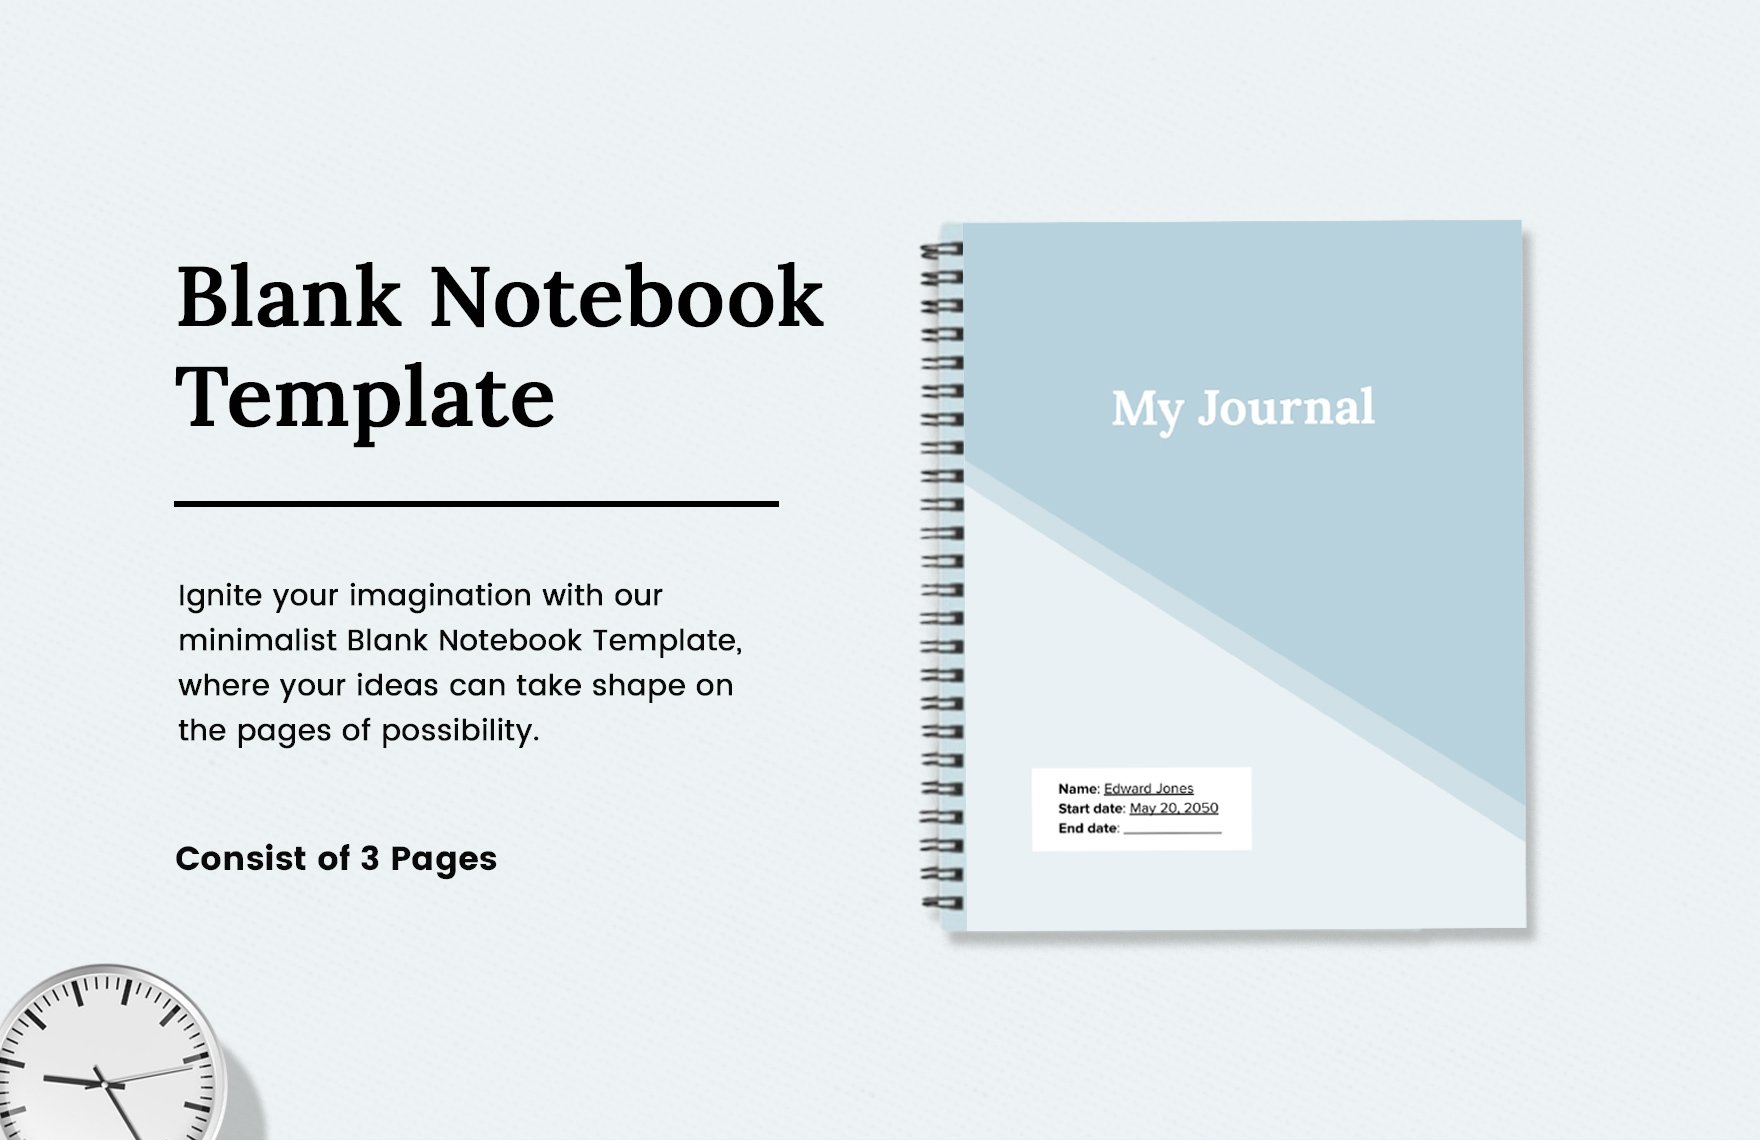 Blank Notebooks / Journals / Books with Tabs Templates Clip Art